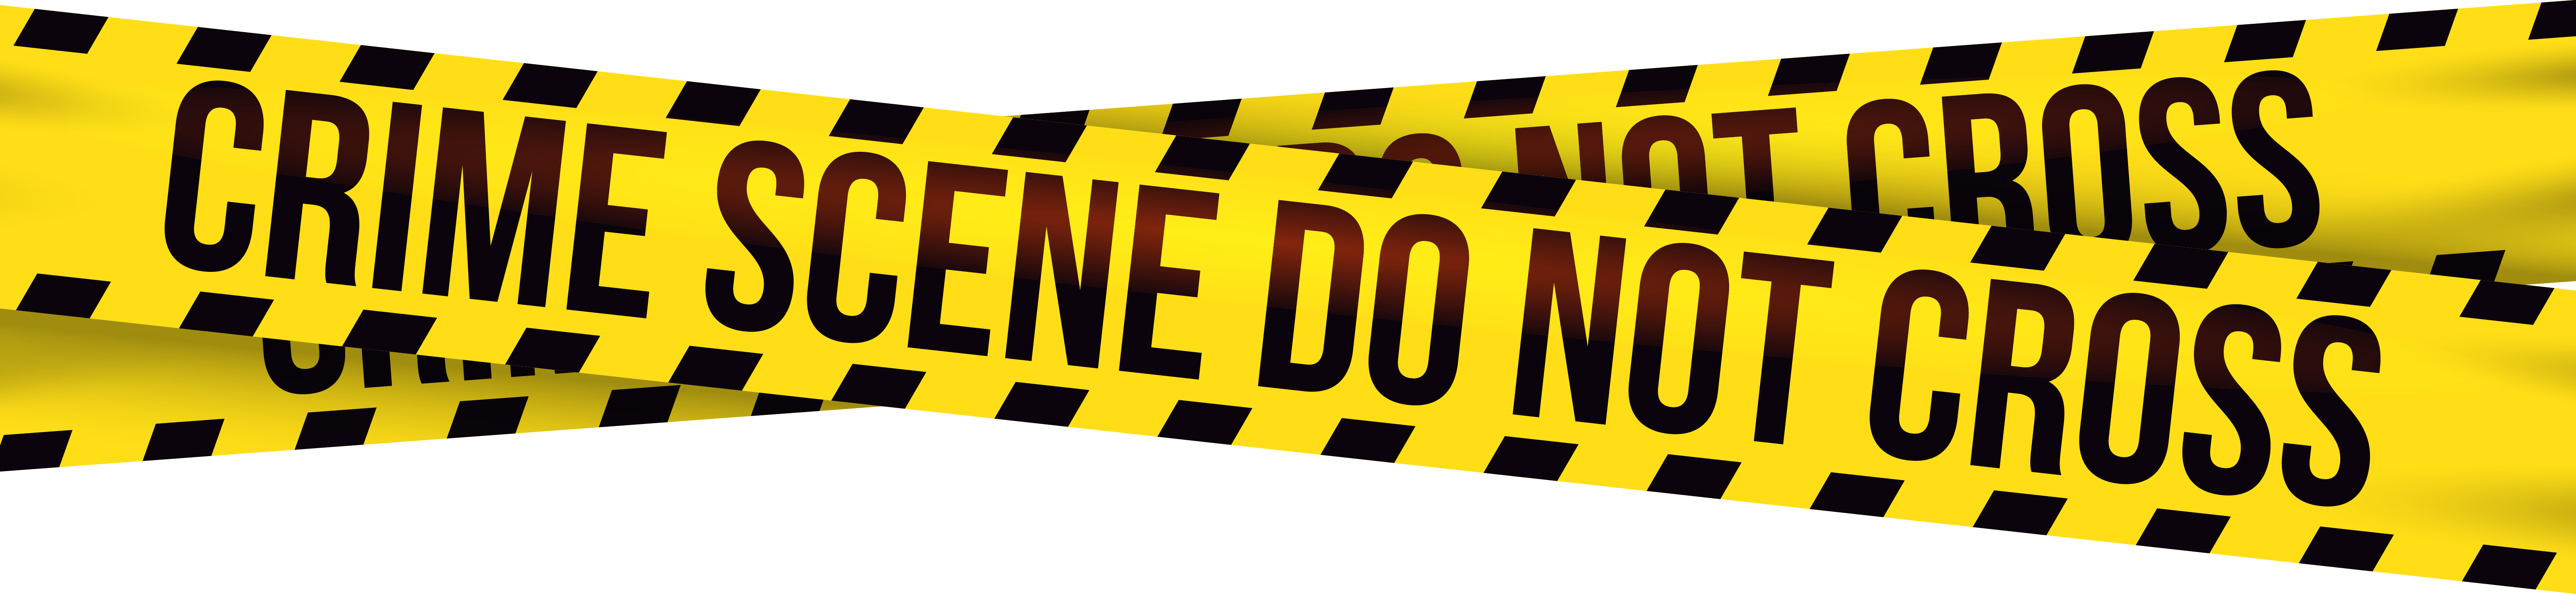 Police tape PNG images free download.